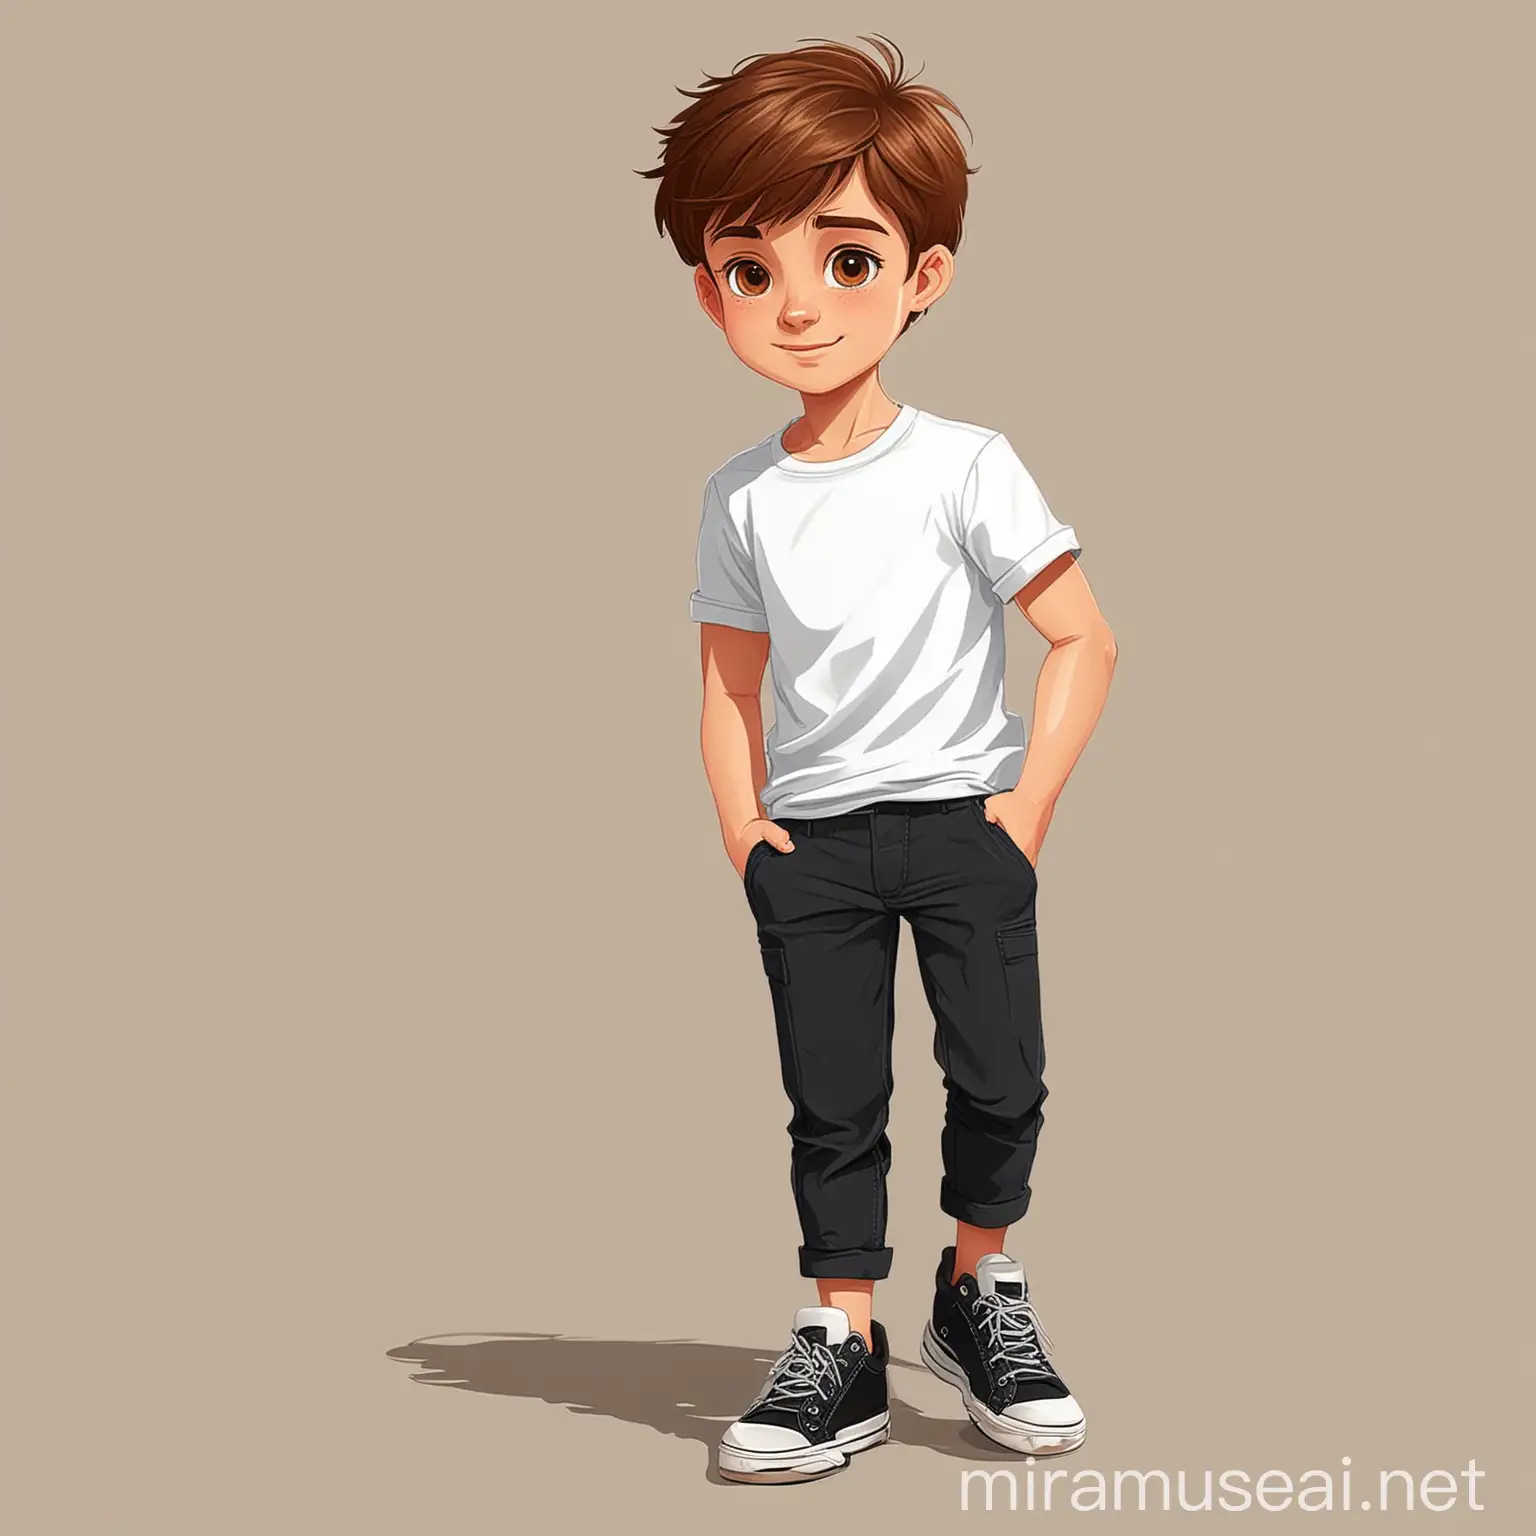 Young Boy in White Shirt and Black Pants Vector Illustration